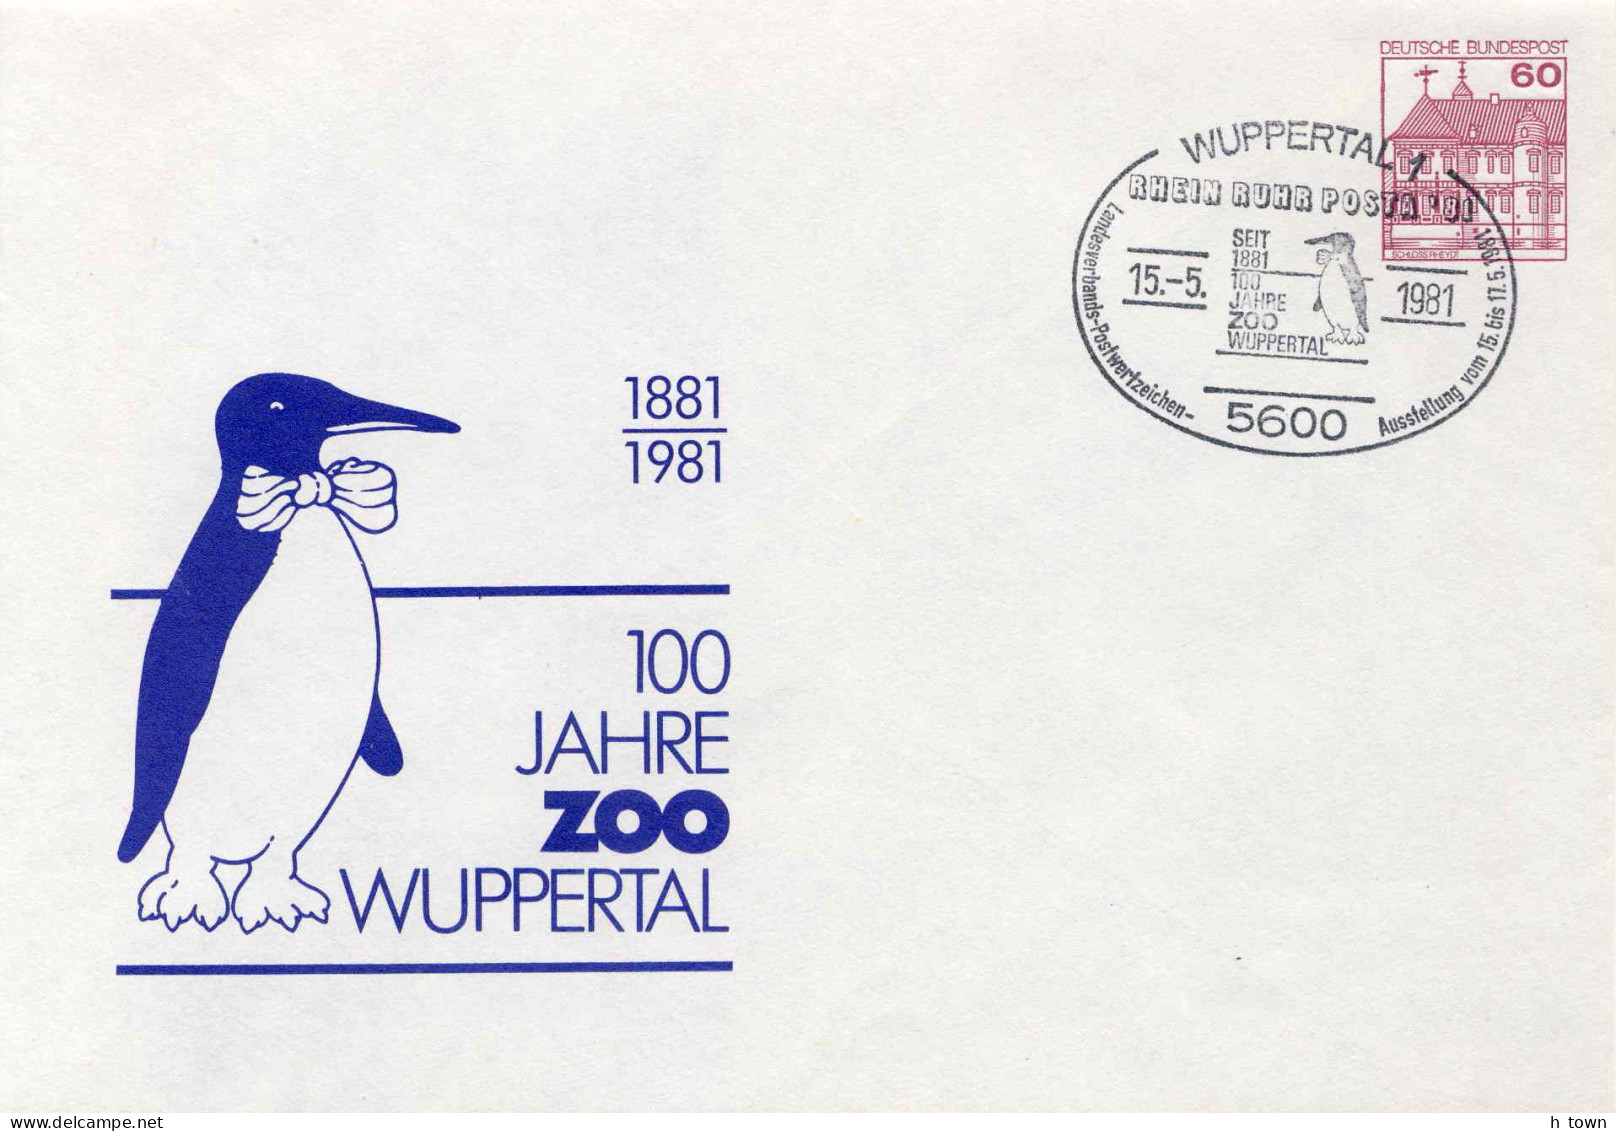 930  Manchot Pingouin, Zoo: PAP D'Allemagne, 1981 - Penguin, Wuppertal Zoo Postal Stationery Cover From Germany - Pingouins & Manchots